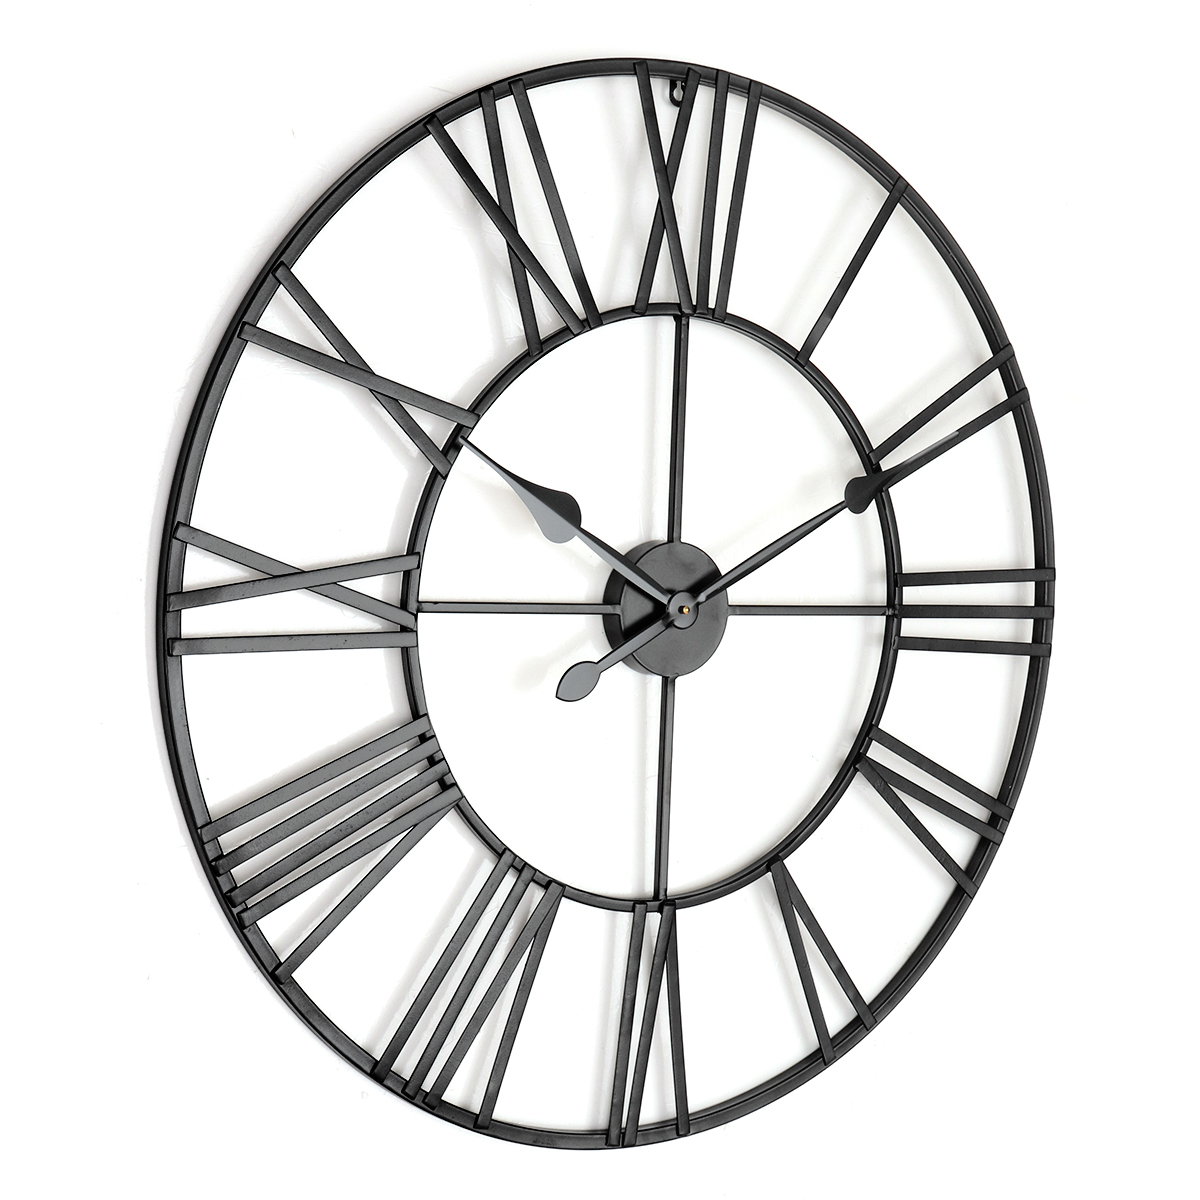 Find 80cm Large Outdoor Garden Wall Clock Roman Numerals Giant Open Face Metal for Sale on Gipsybee.com with cryptocurrencies